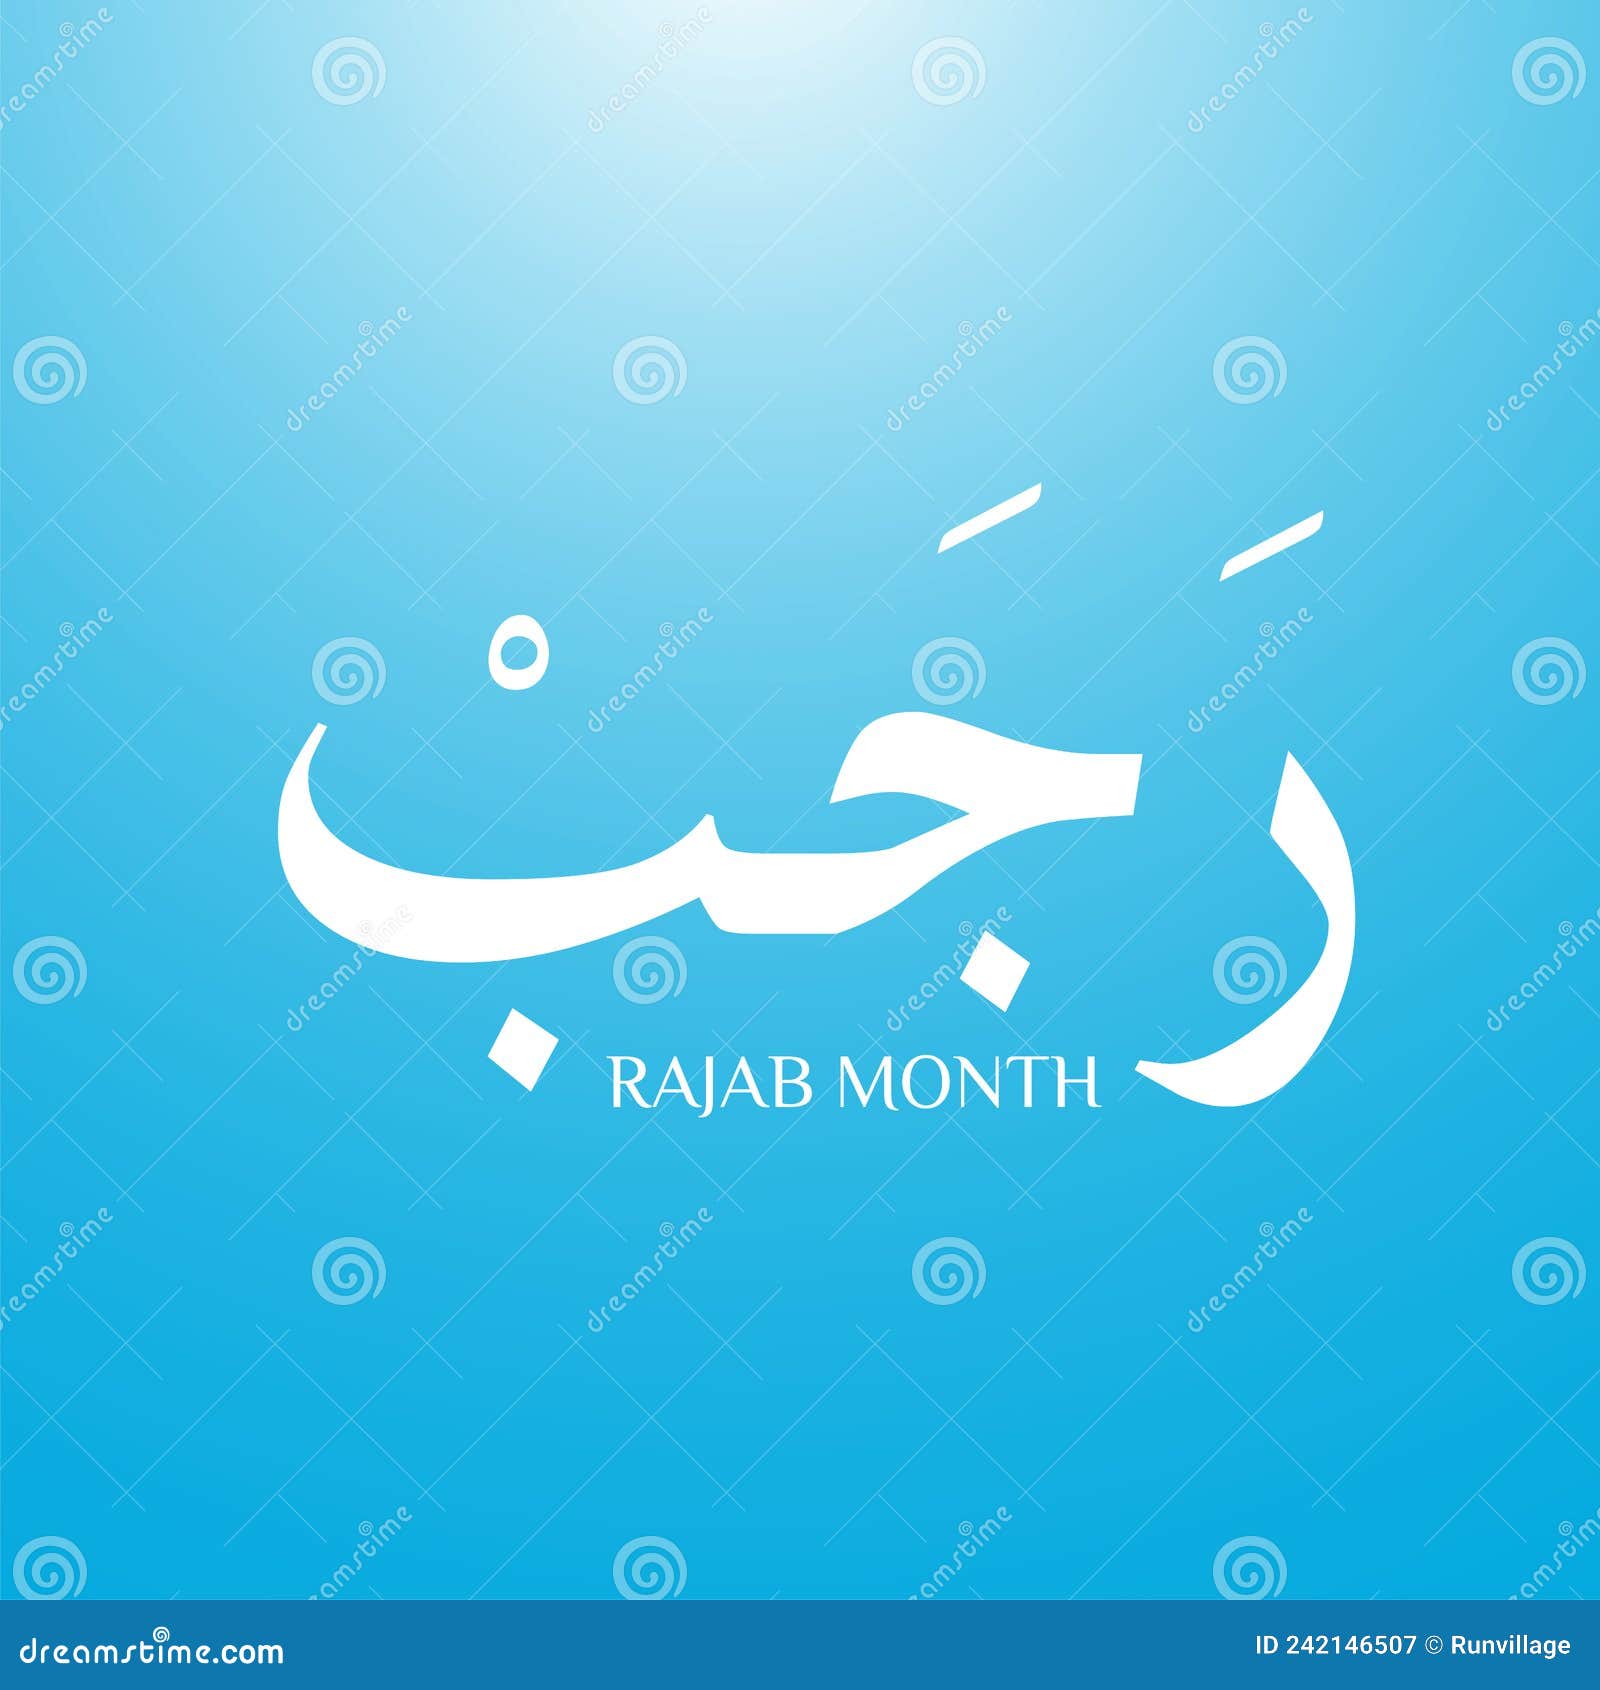 rajab is the seventh month of the islamic calendar. the lexical definition of the classical arabic verb rajaba is